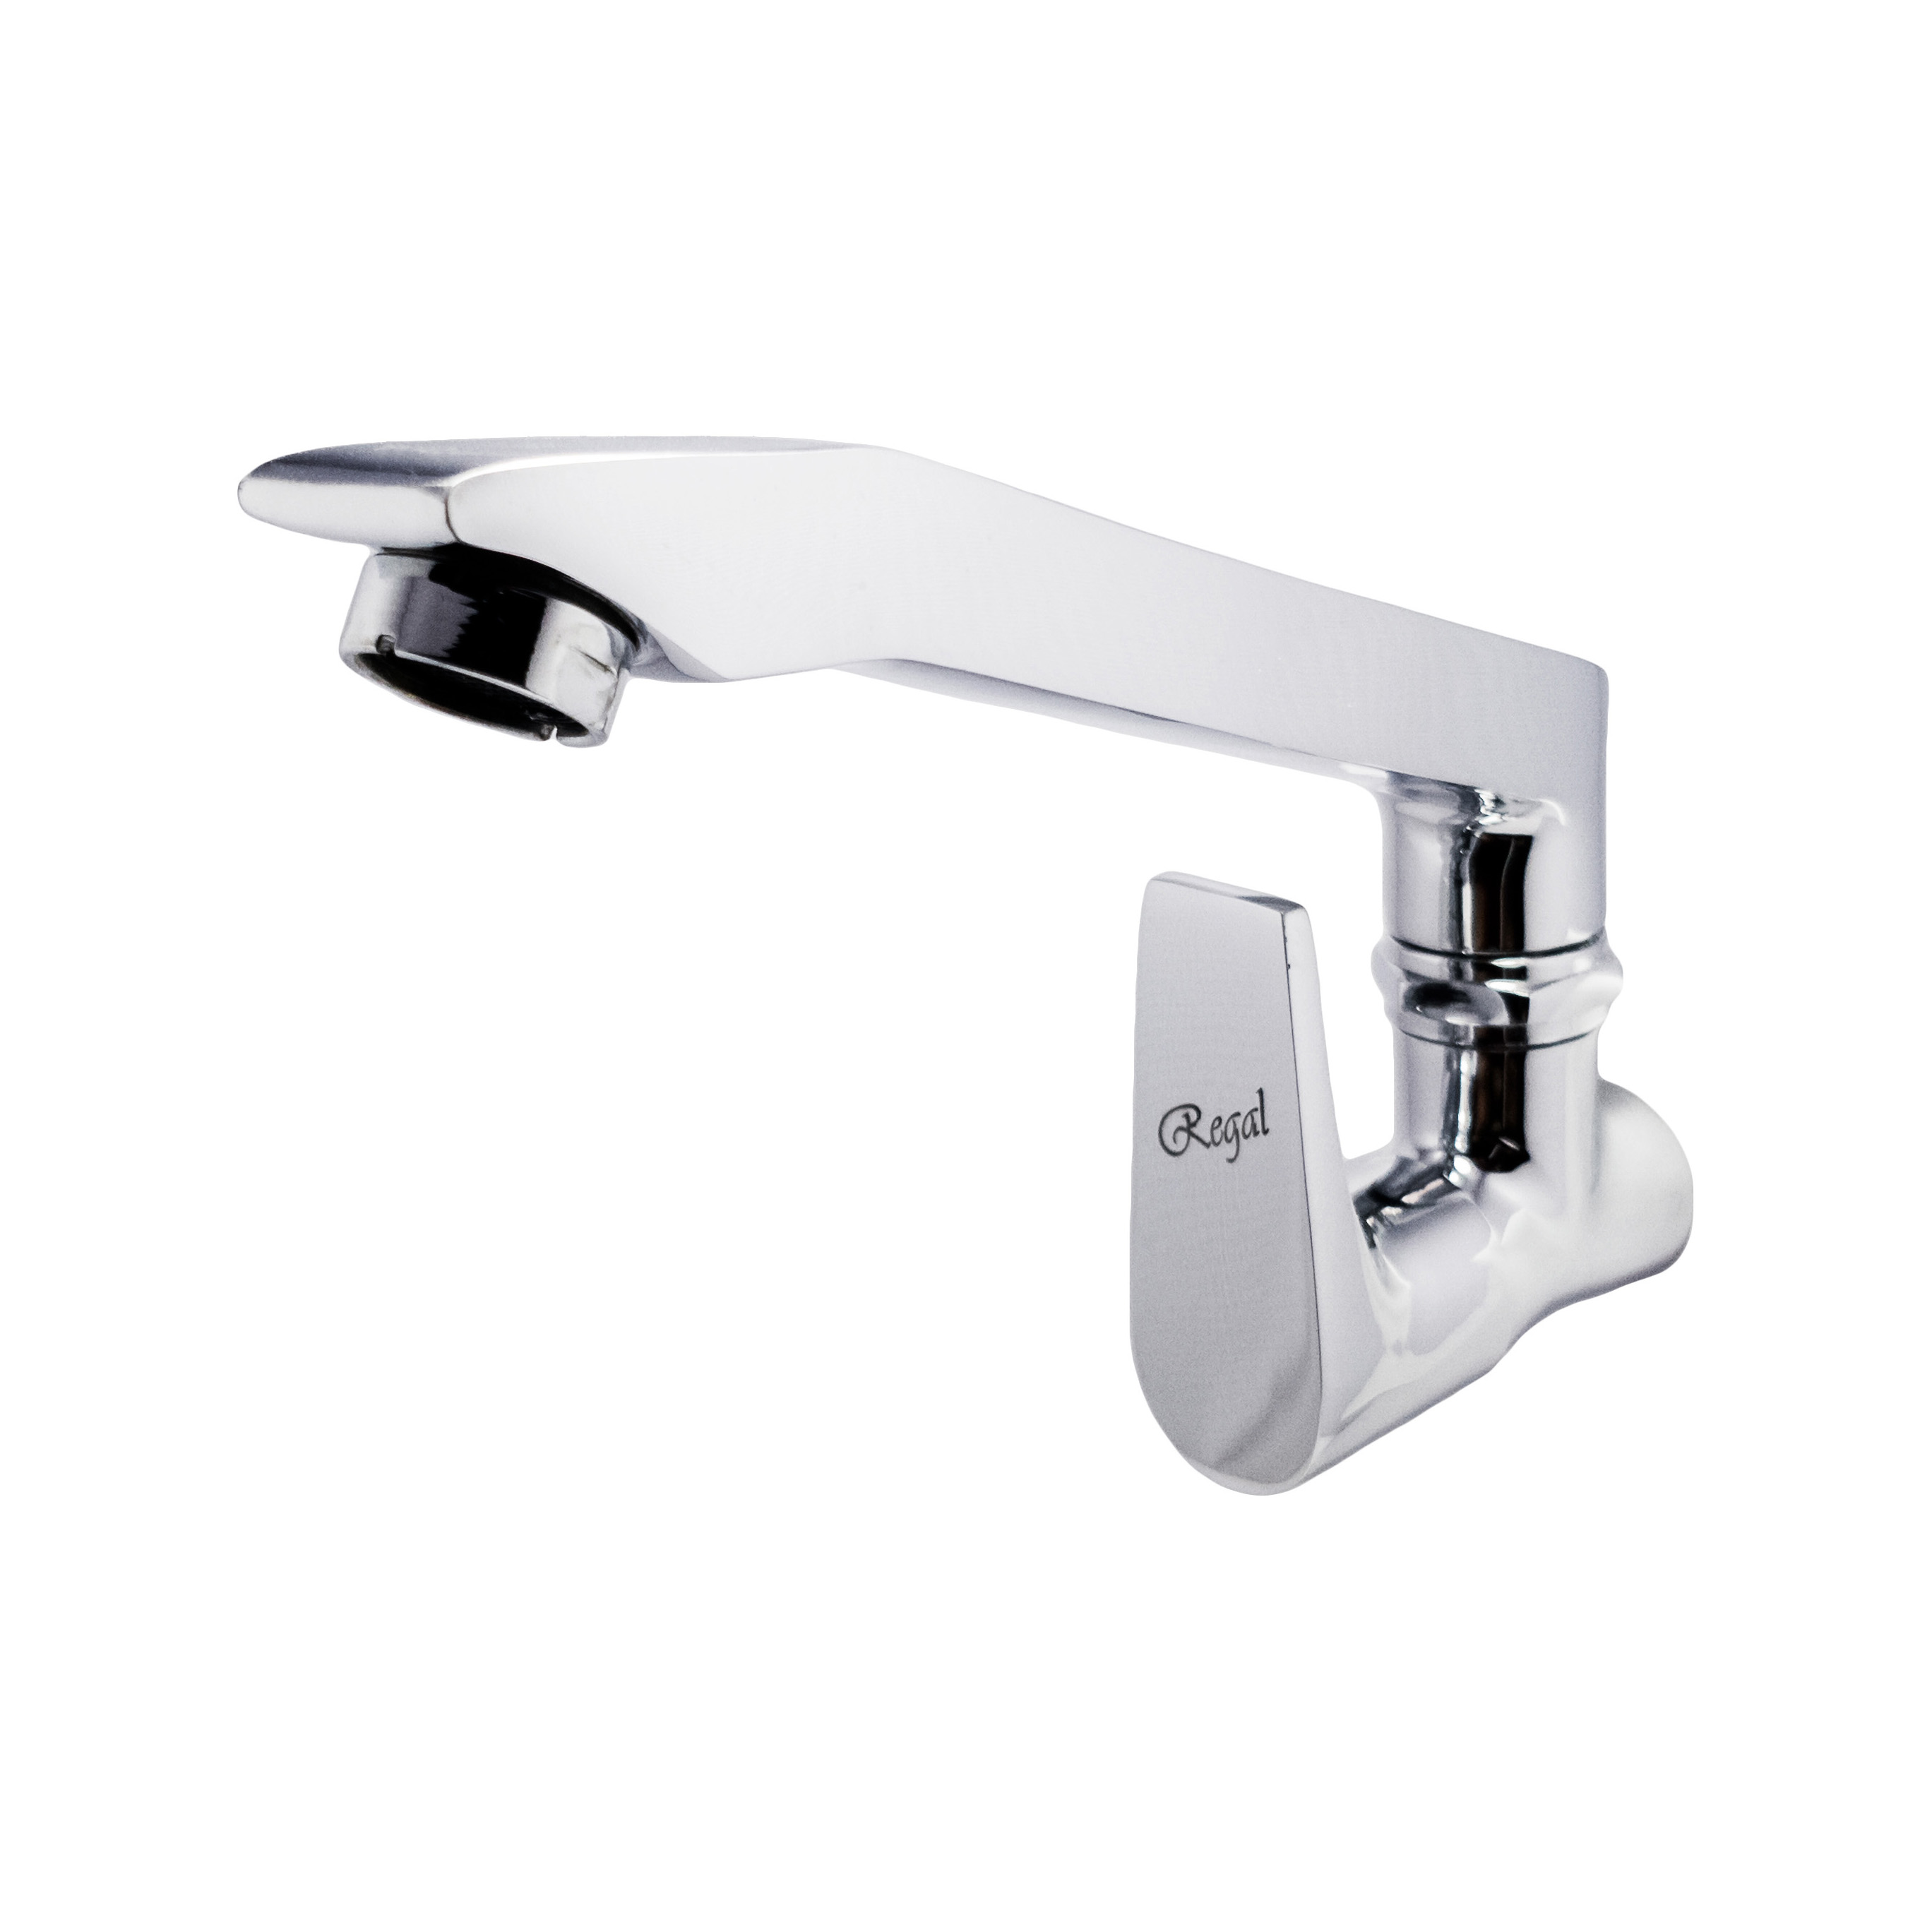 Fabia Sink Cock Swivel Spout With Wall Flange